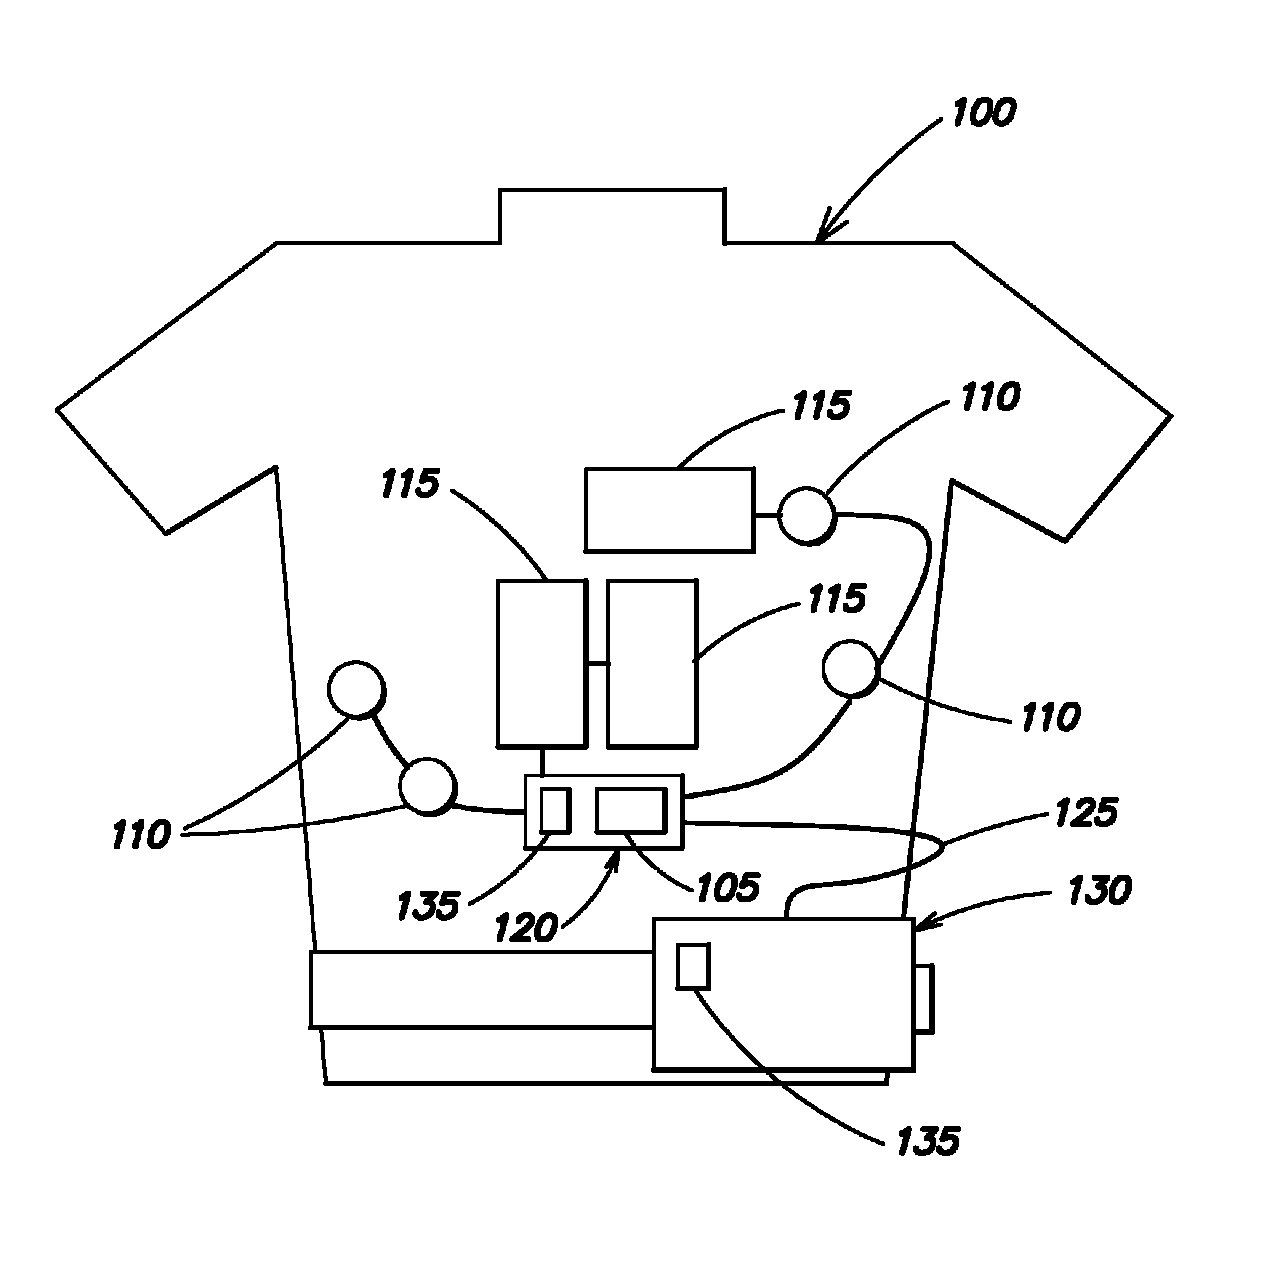 Wearable medical treatment device